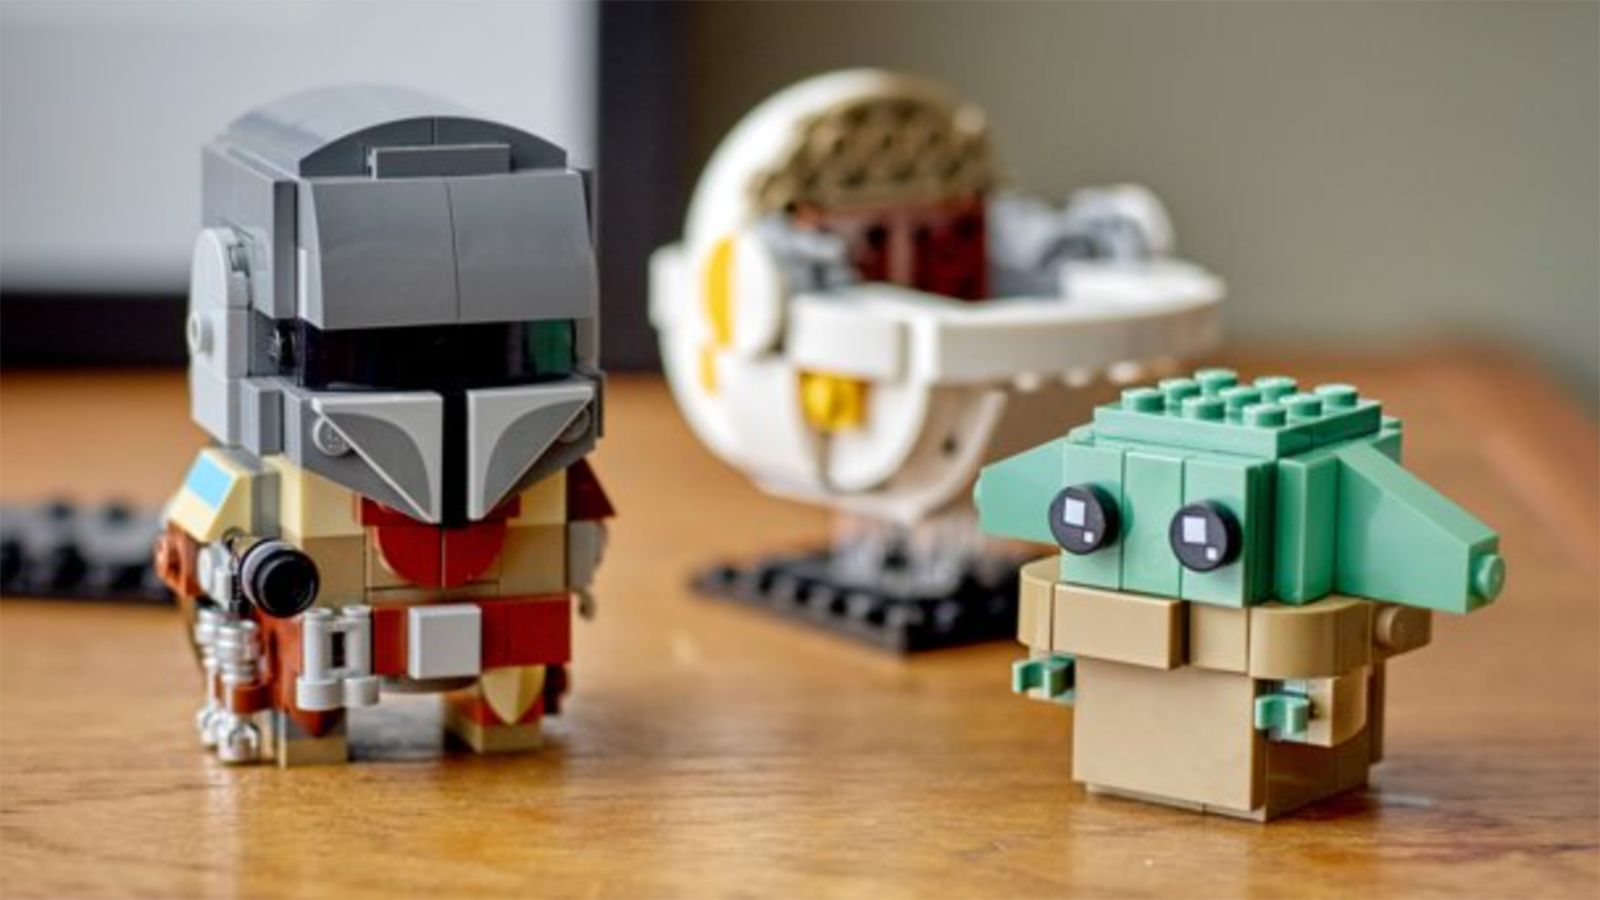 Celebrate May the 4th with these great deals on ‘Star Wars’ Lego sets | CNN Underscored